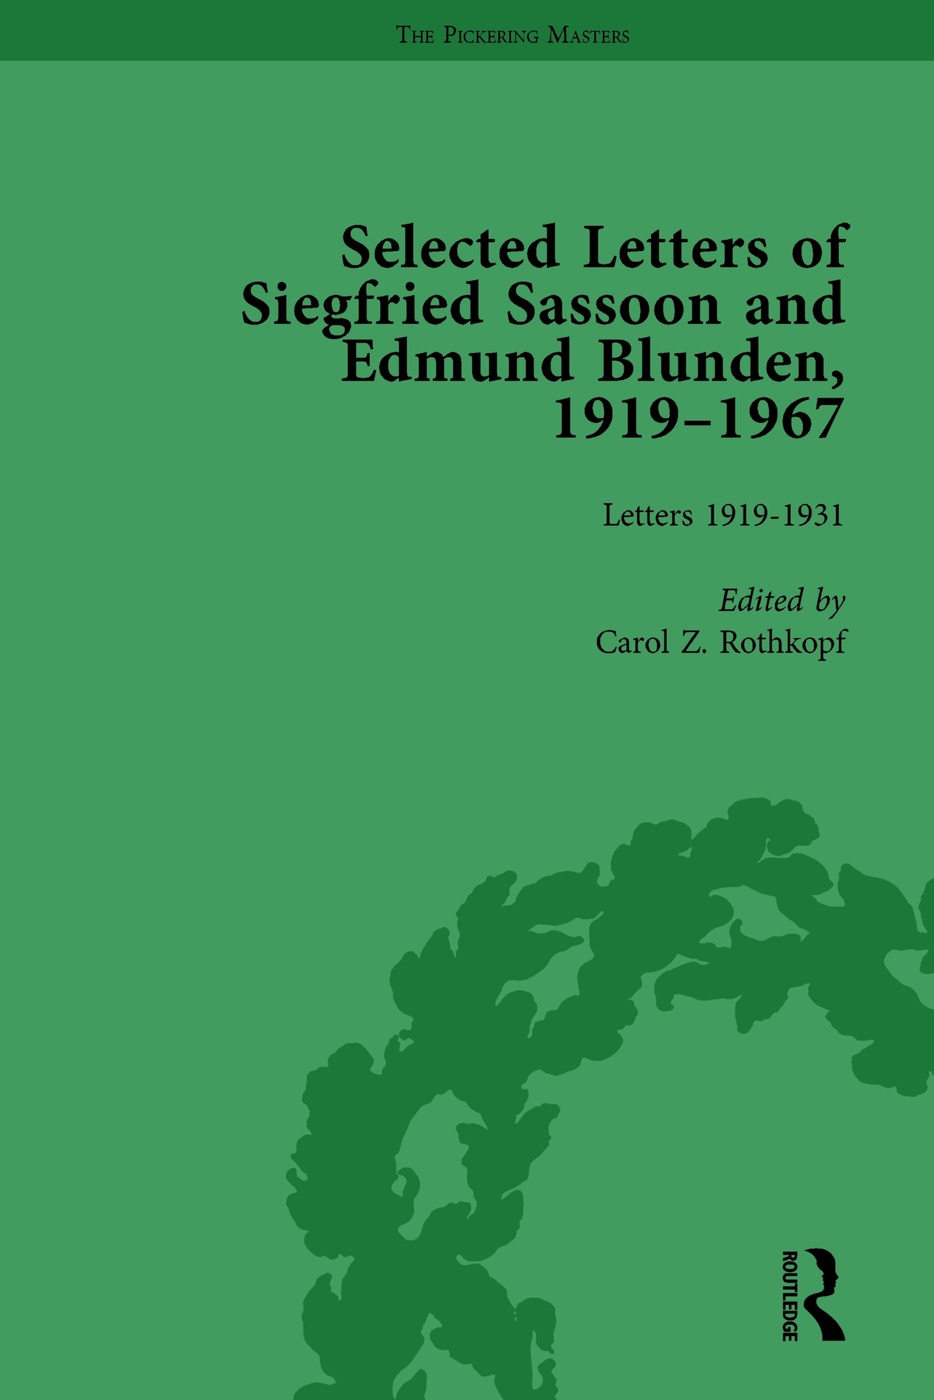 Selected Letters of Siegfried Sassoon and Edmund Blunden, 1919-1967 Vol 1